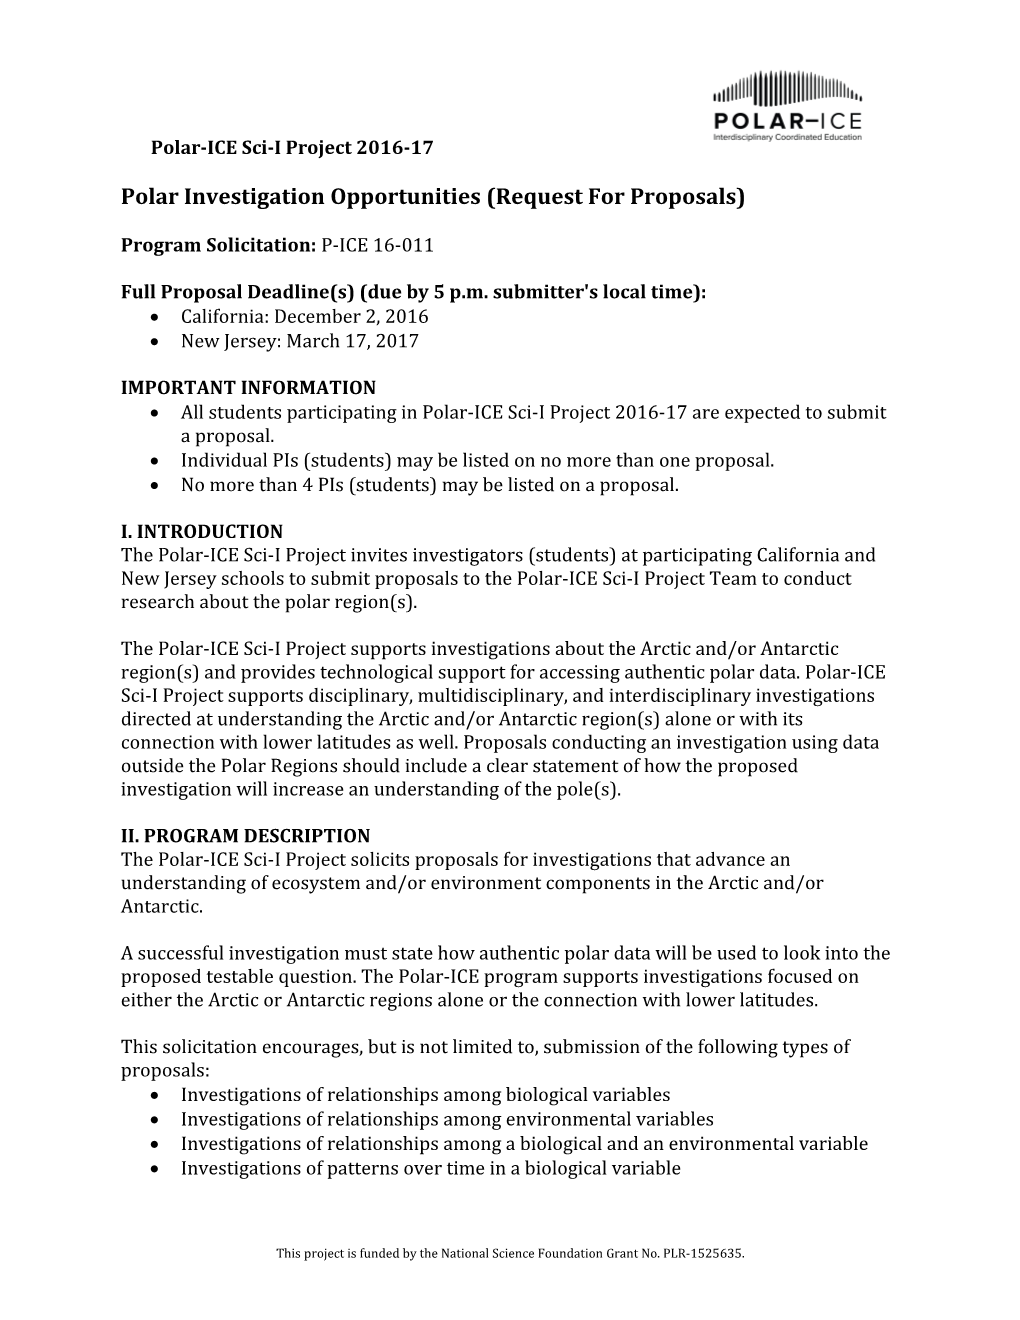 Polarinvestigation Opportunities (Request for Proposals)